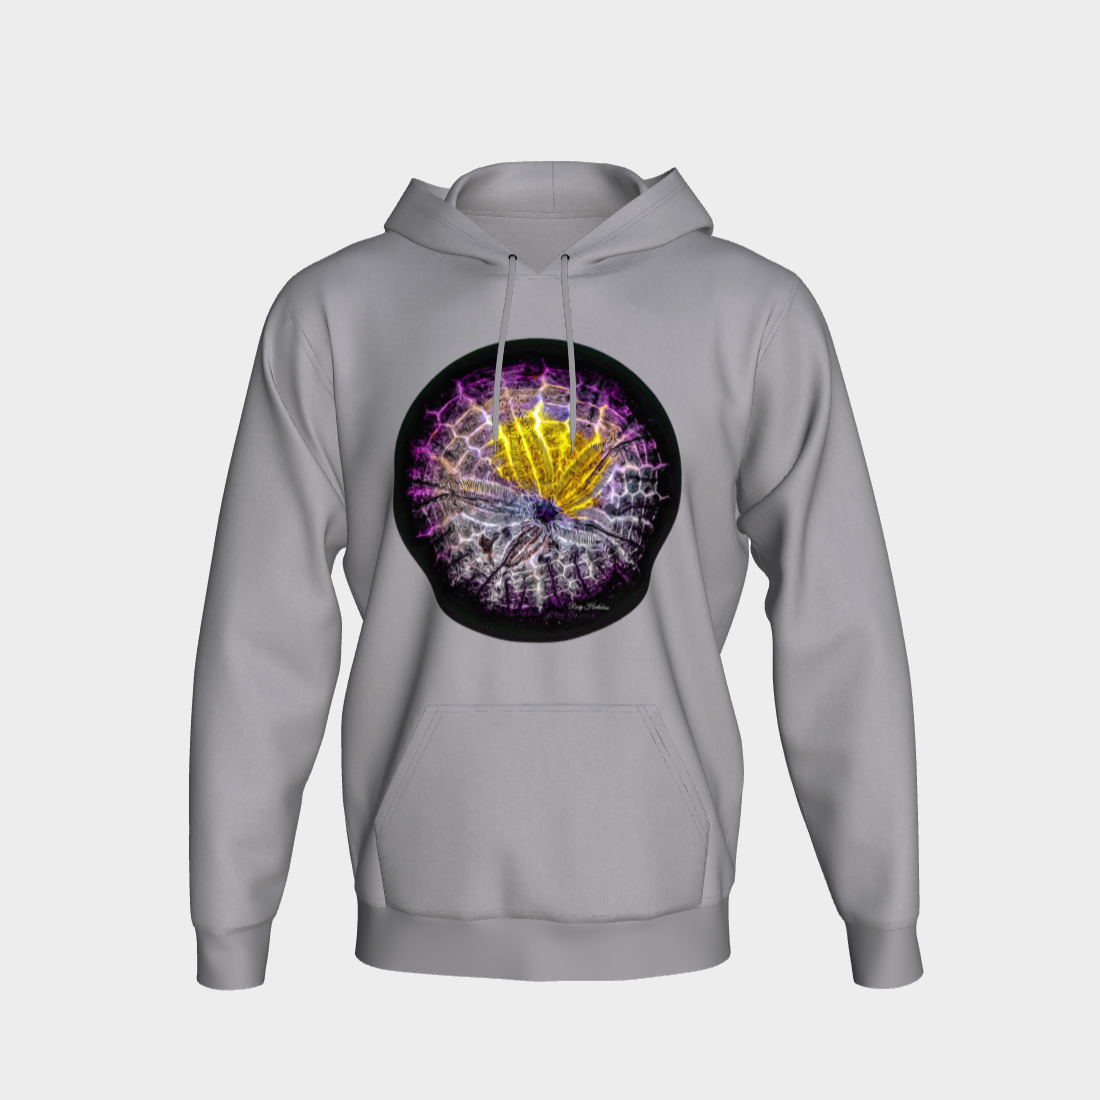 Spotlight Sand Dollar Unisex Pullover Hoodie Your Van Isle Goddess unisex pullover hoodie is a great classic hoodie!  Created with state of the art tri-tex material which is a non-shrink poly middle encased in two layers of ultra soft cotton face and lining.